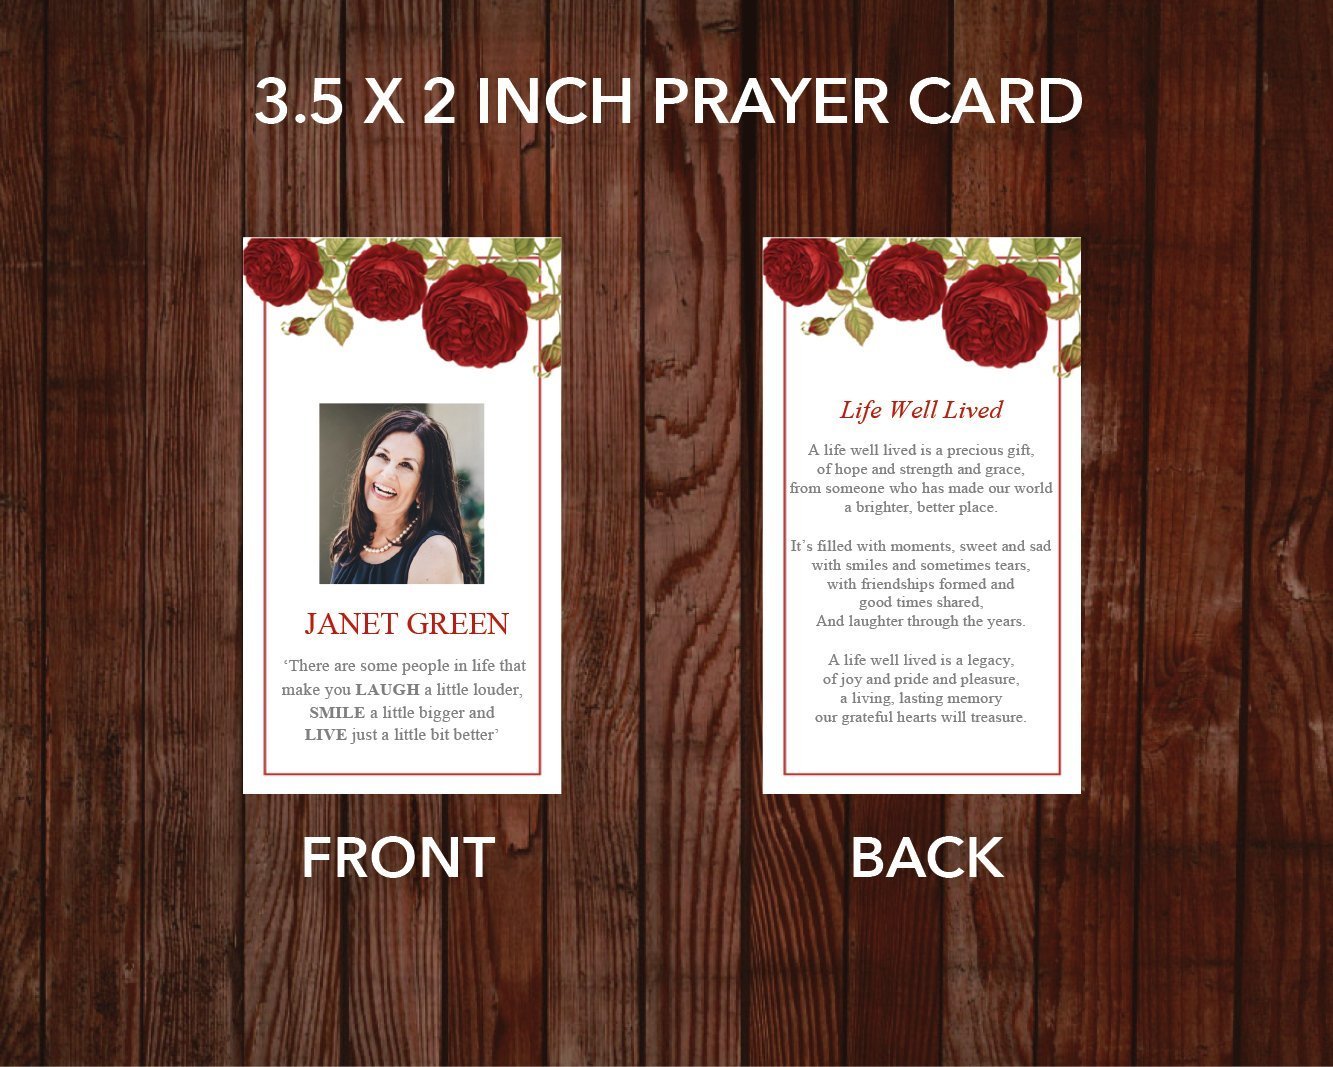 4 Page Red Rose Funeral Program Template + 4 matching Templates